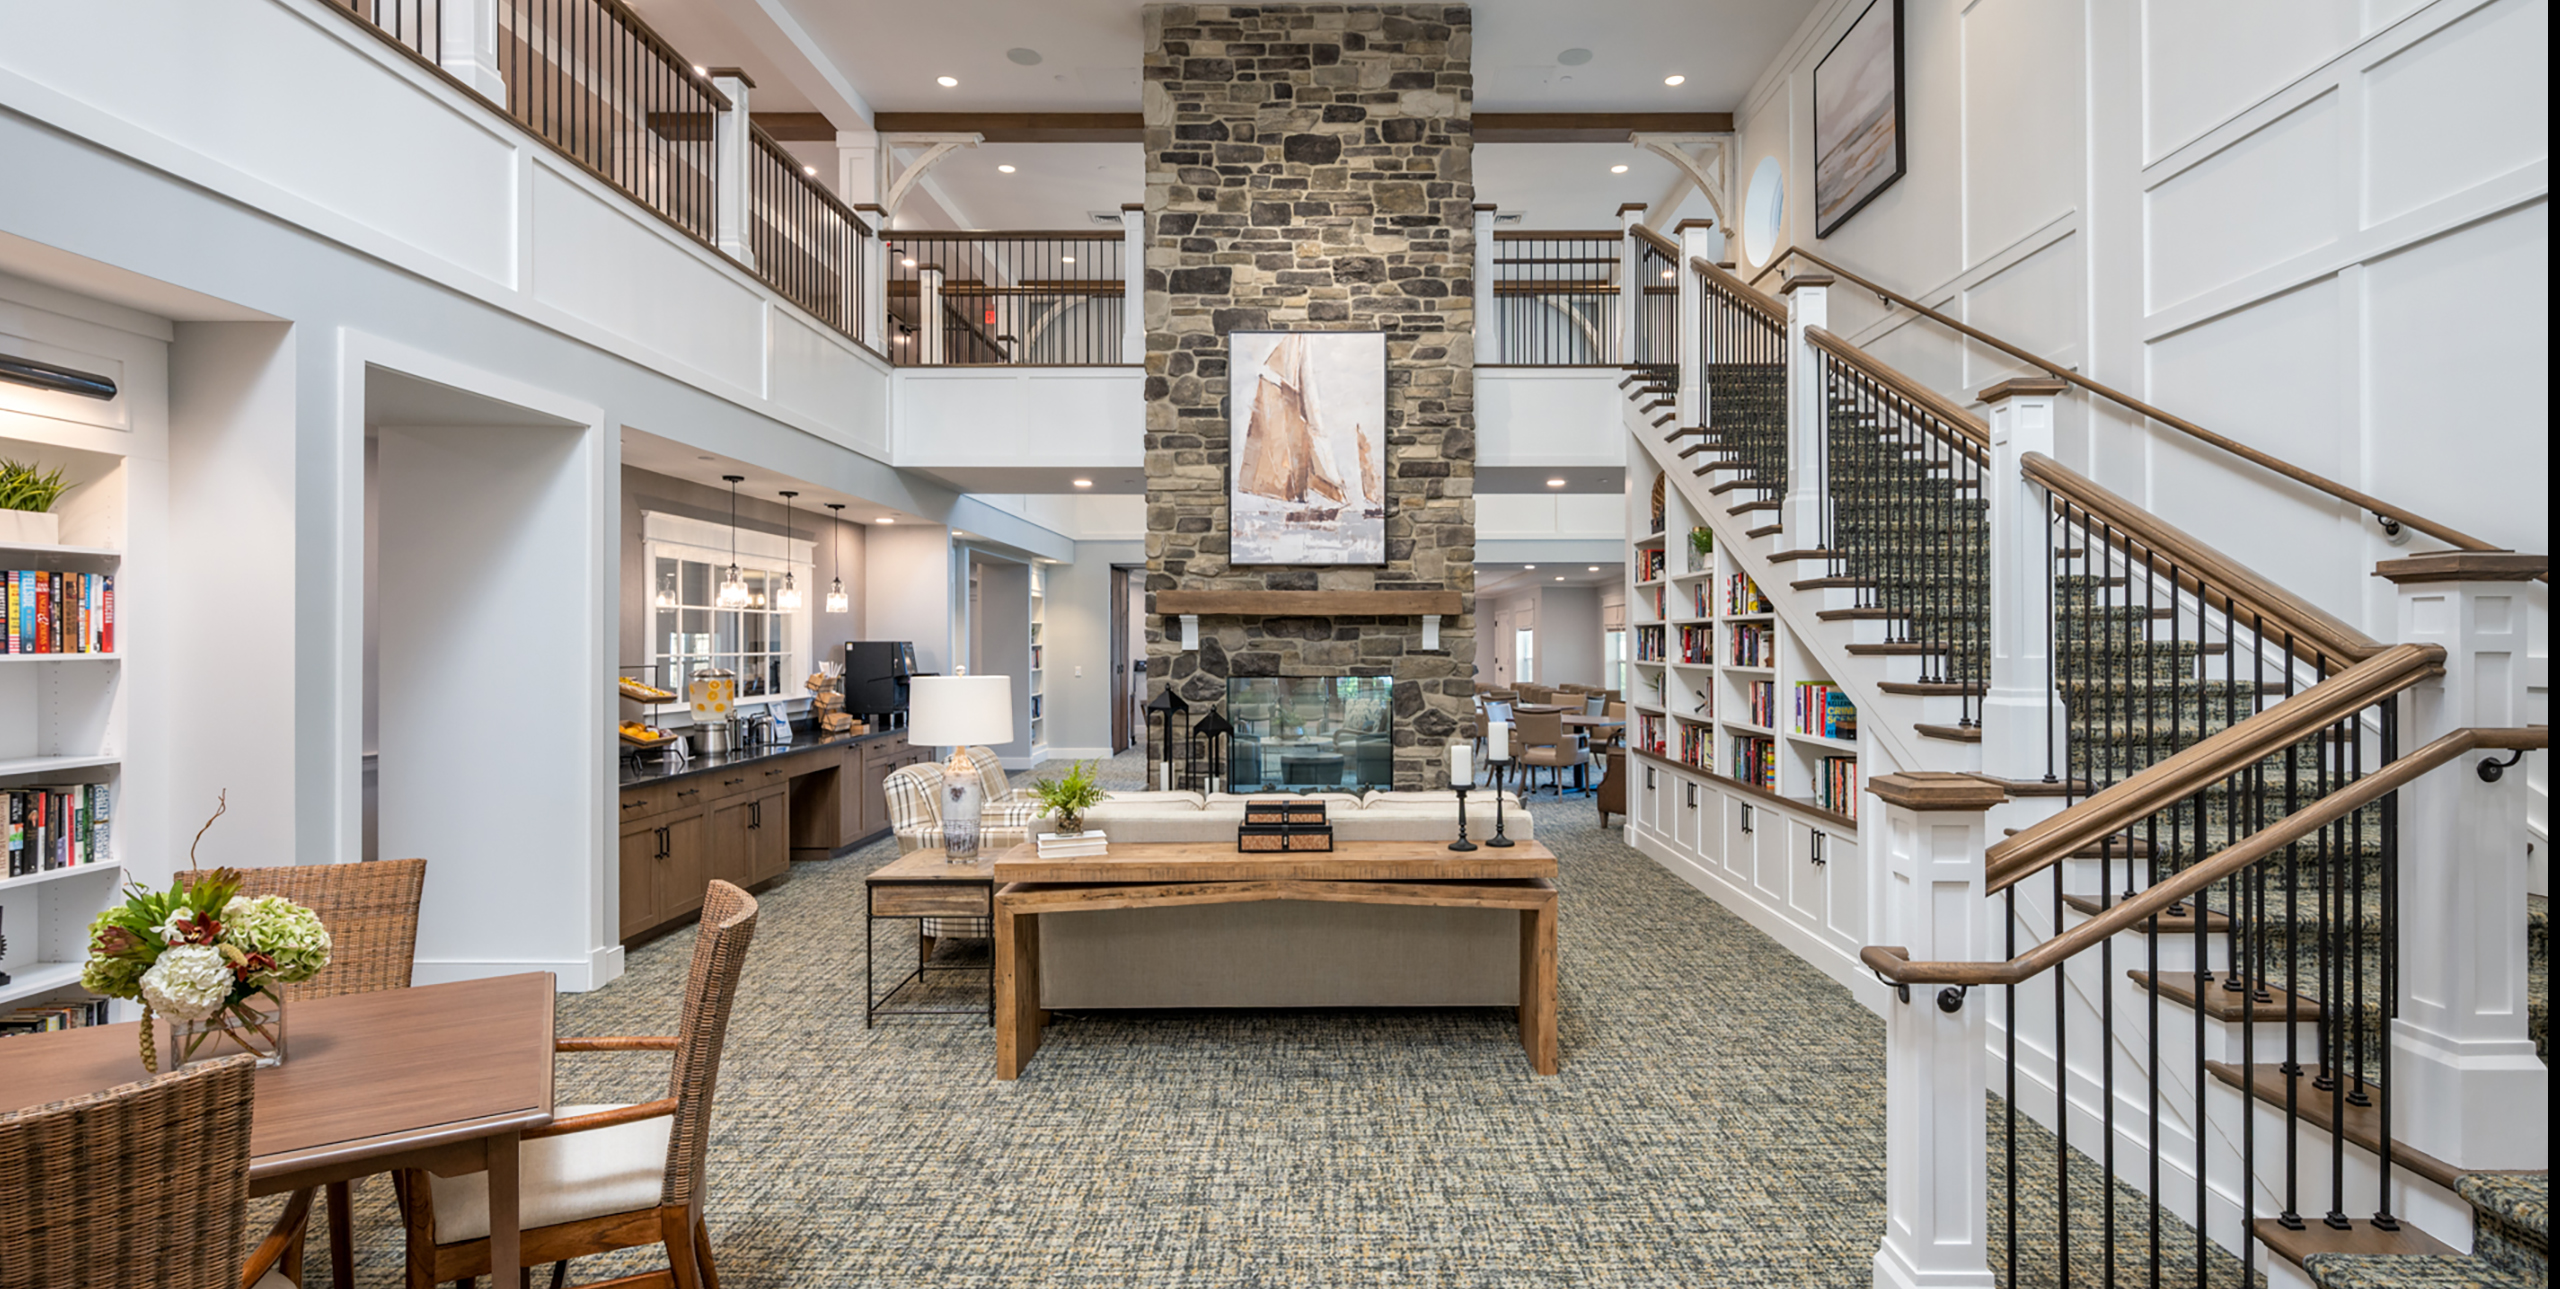 The grand staircase and fireplace in the common area at Brightview Senior Living Port Jeff